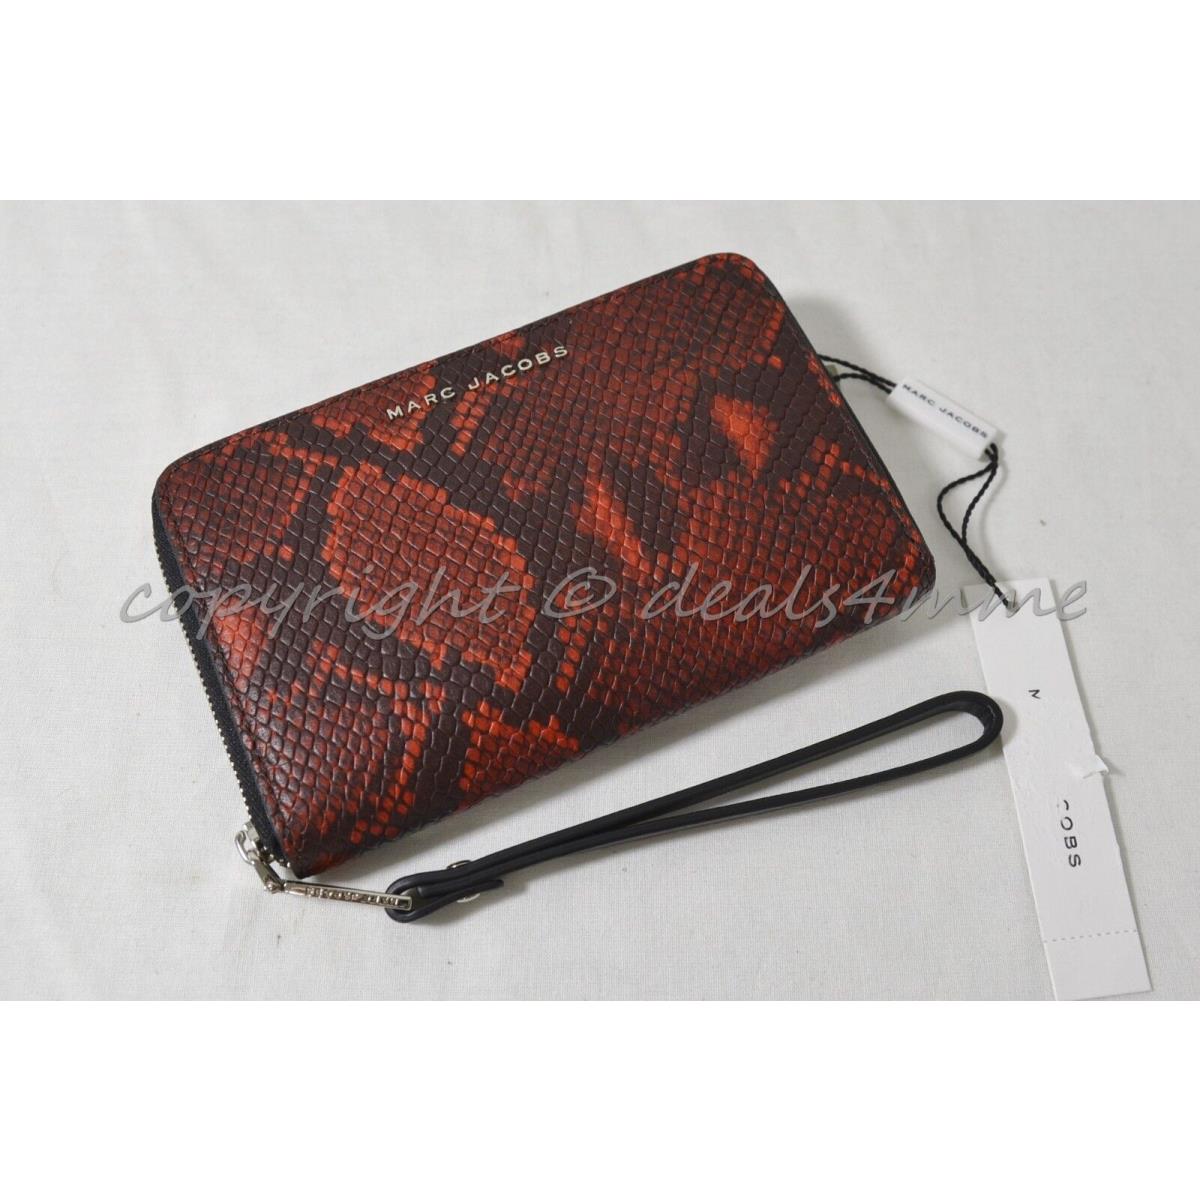 Marc By Marc Jacobs M0008273 Wallet/wristlet in Red Snake Embossed Black Strap